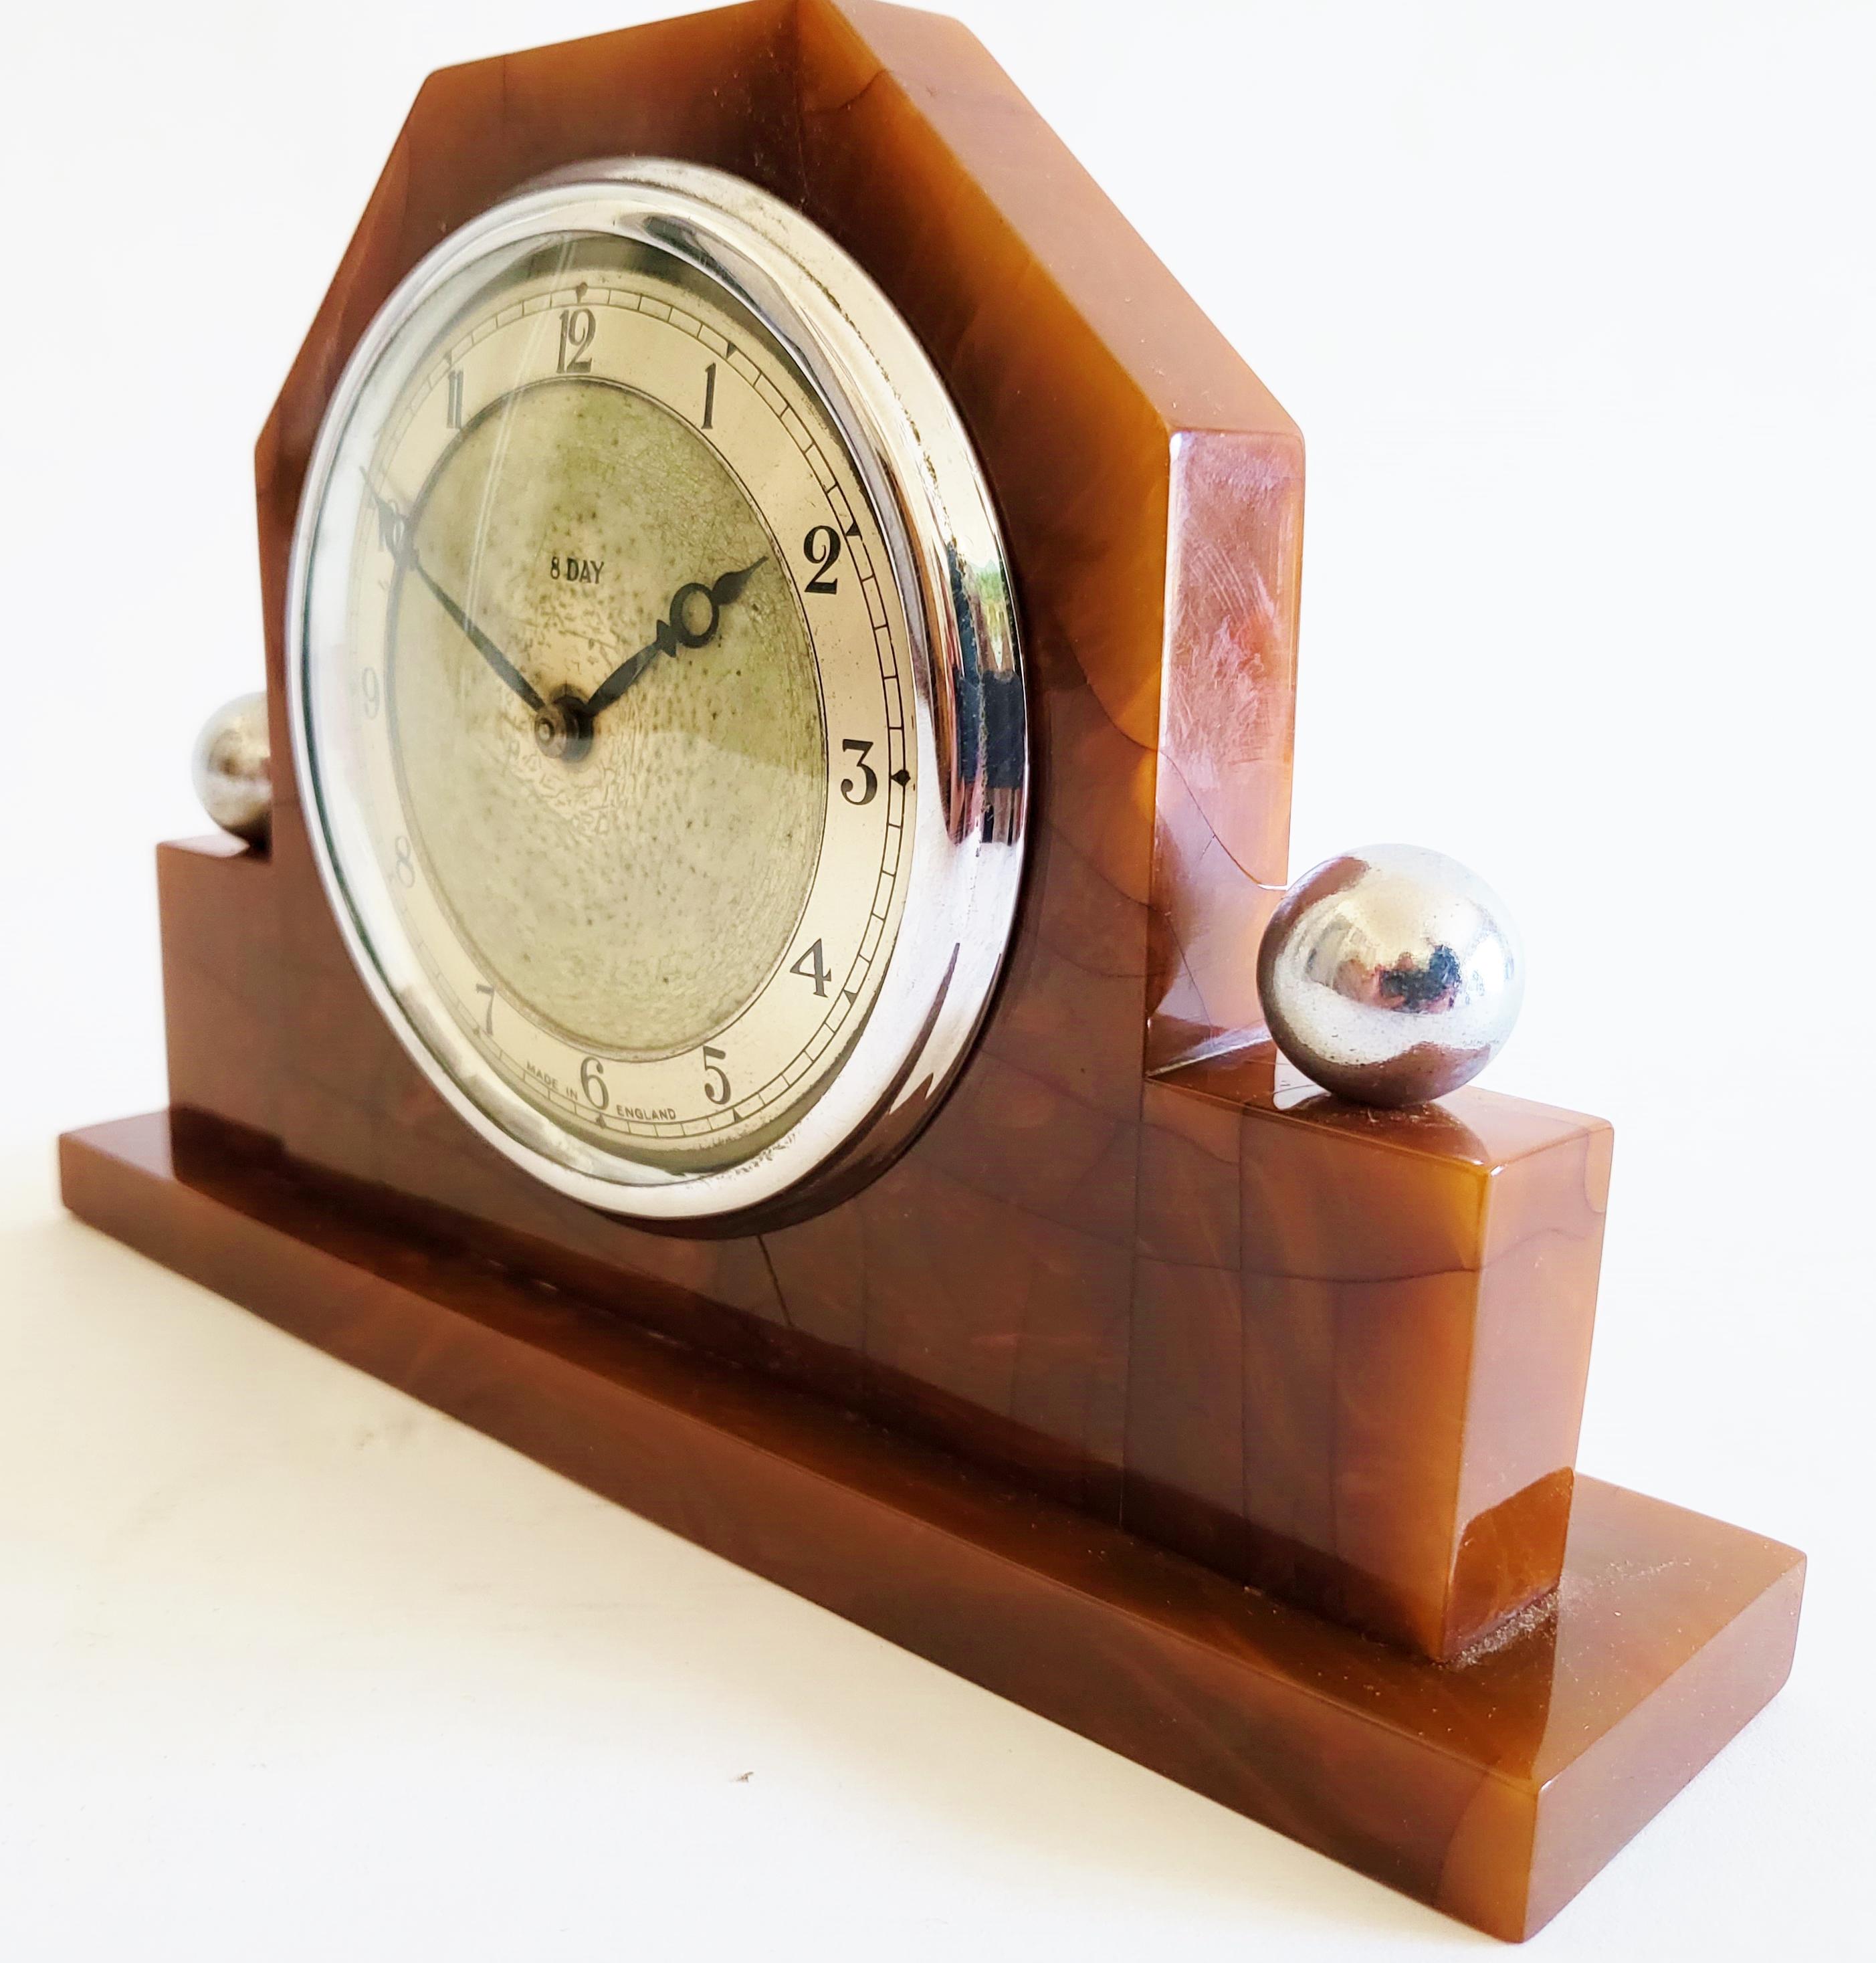 This very pretty English Art Deco 8-day mechanical desk clock features a geometric body of solid tortoiseshell with a bezel in polished chrome. Topping the two Bakelite pillars on either side are two polished chrome spheres and as befitting a